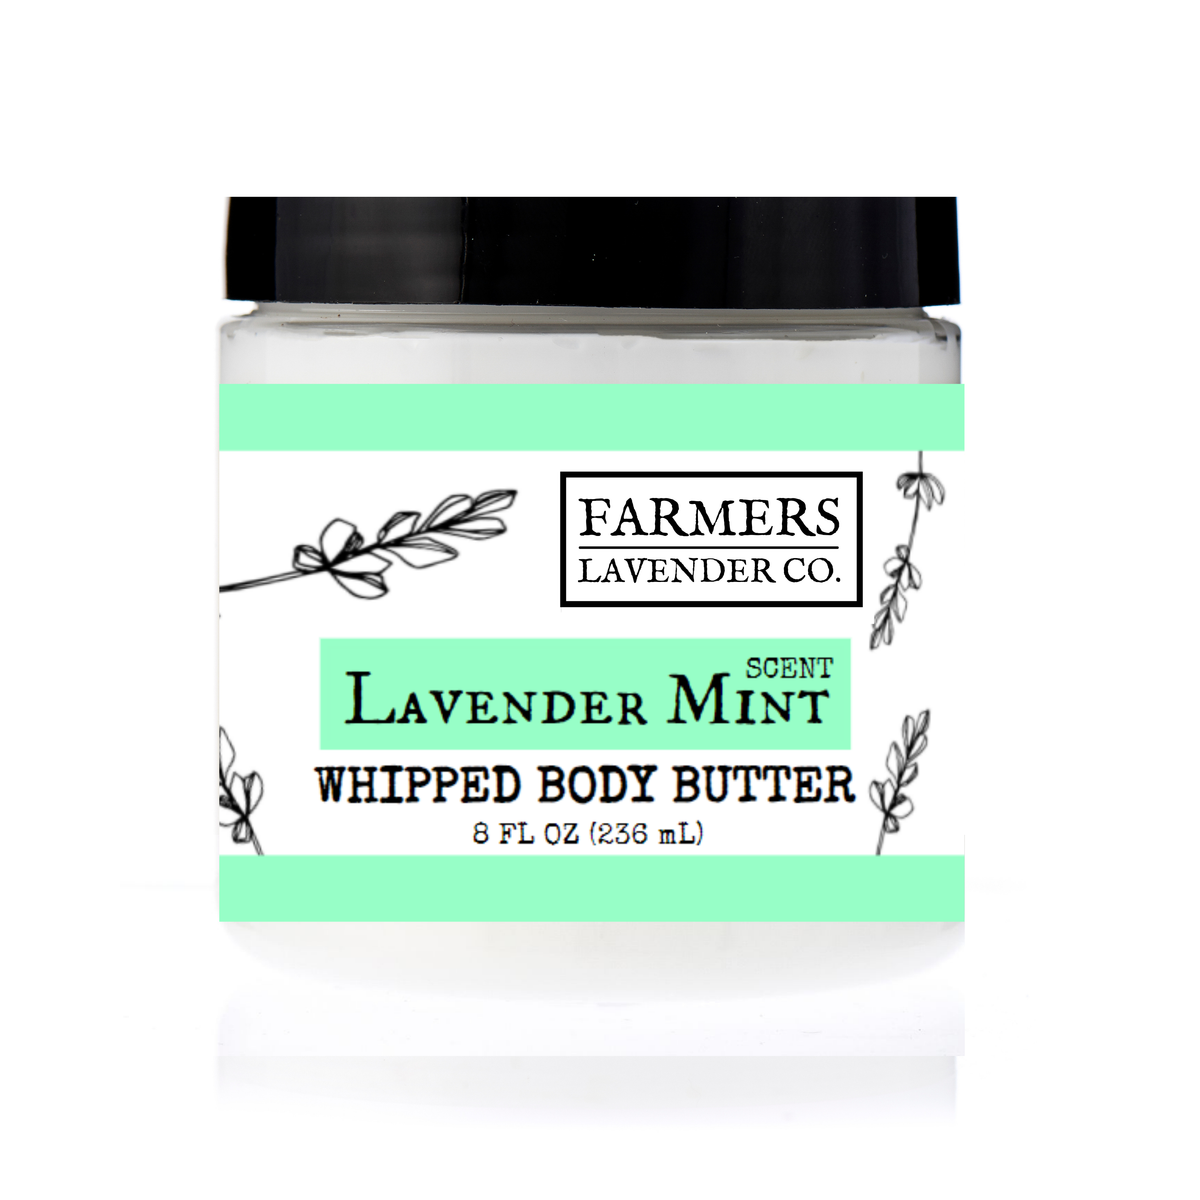 A jar of FARMERS Lavender Co. Lavender Mint Whipped Body Butter, labeled clearly, against a white background.